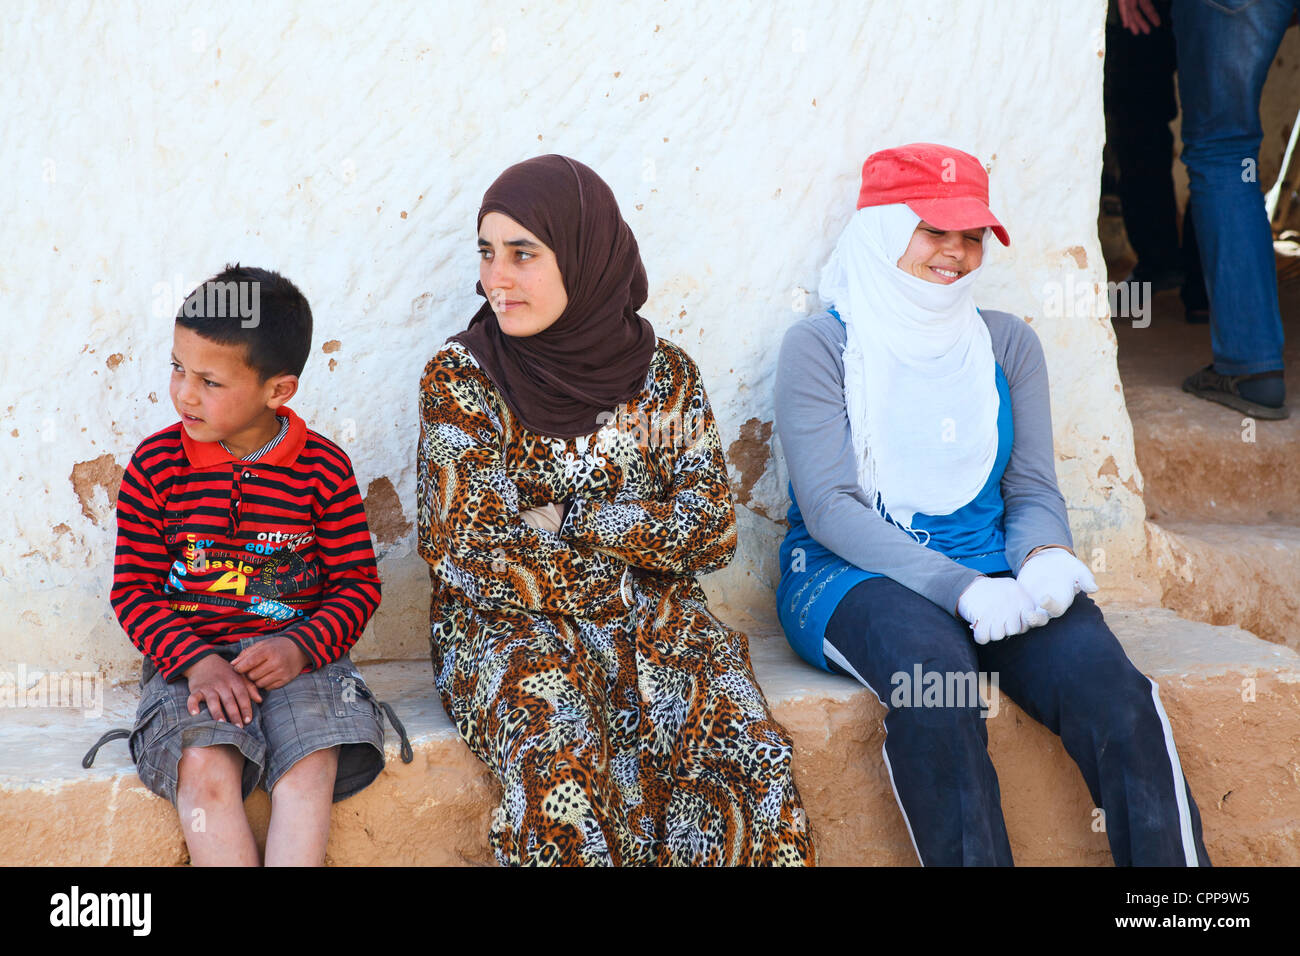 Tunisians people who lived in mountain caves - troglodytes family, Matmata, Tunisia, Africa. Underground living people Stock Photo